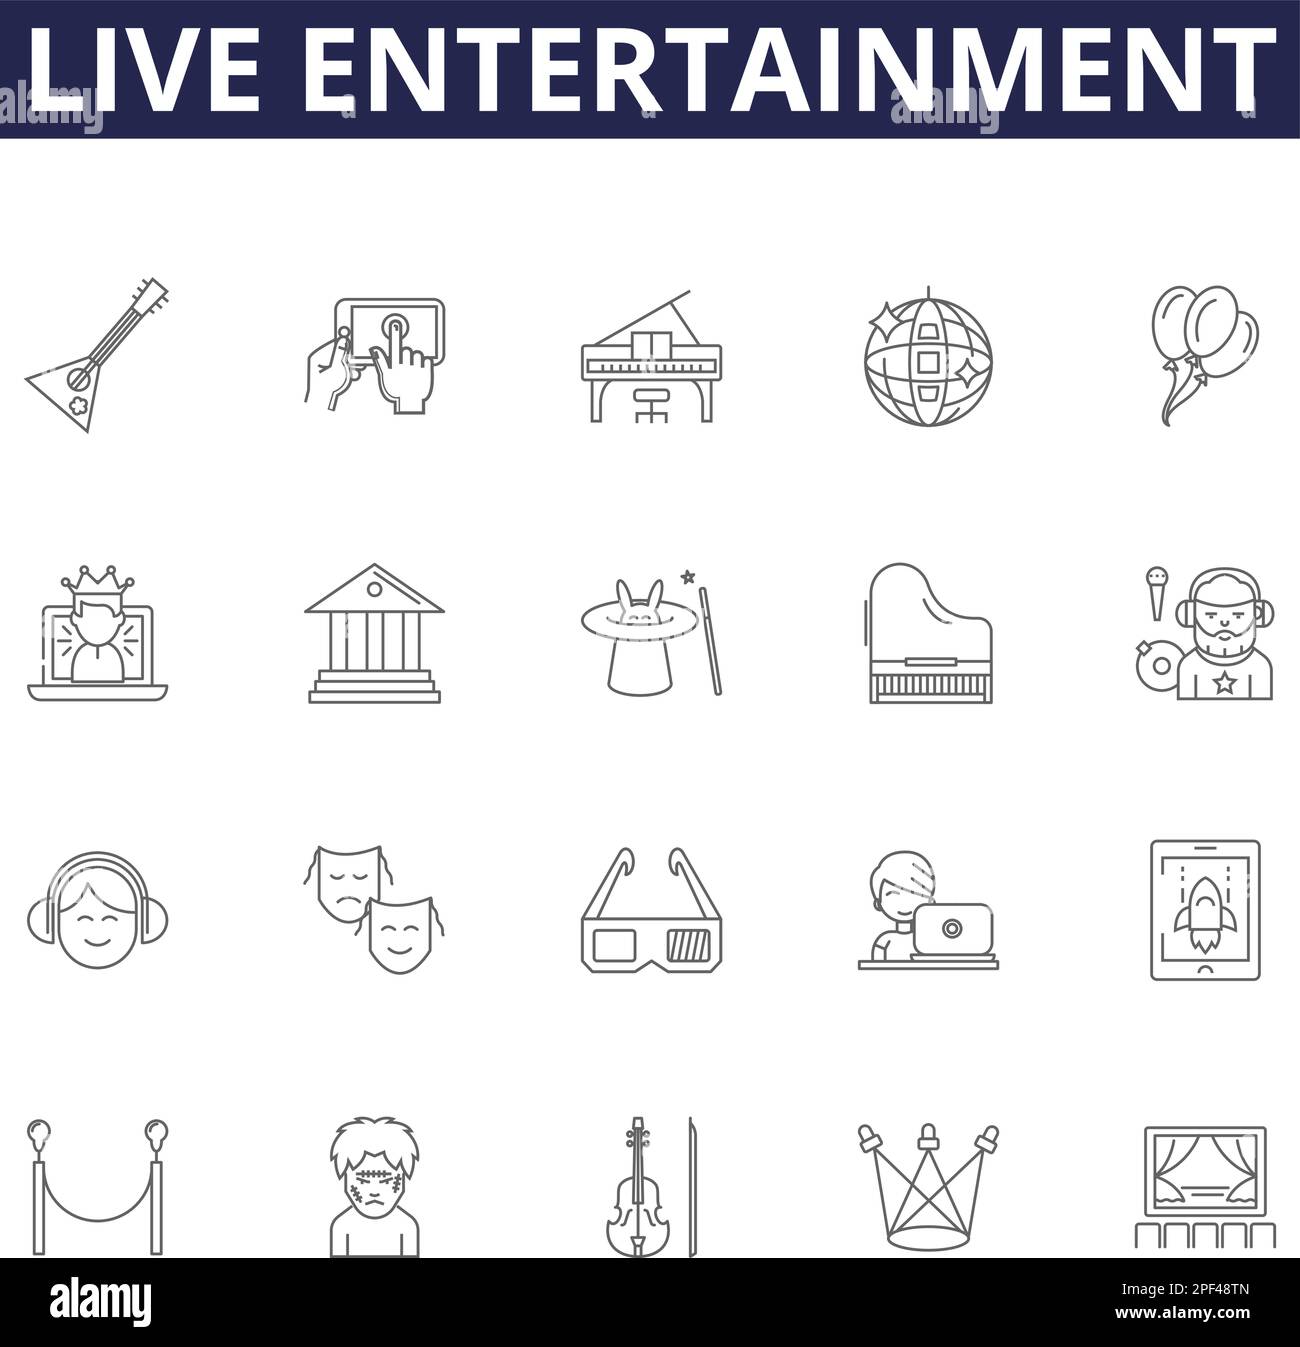 Live entertainment line vector icons and signs. Music, Performance, Dance, Comedy, Concert, Theatre, Band, Act outline vector illustration set Stock Vector